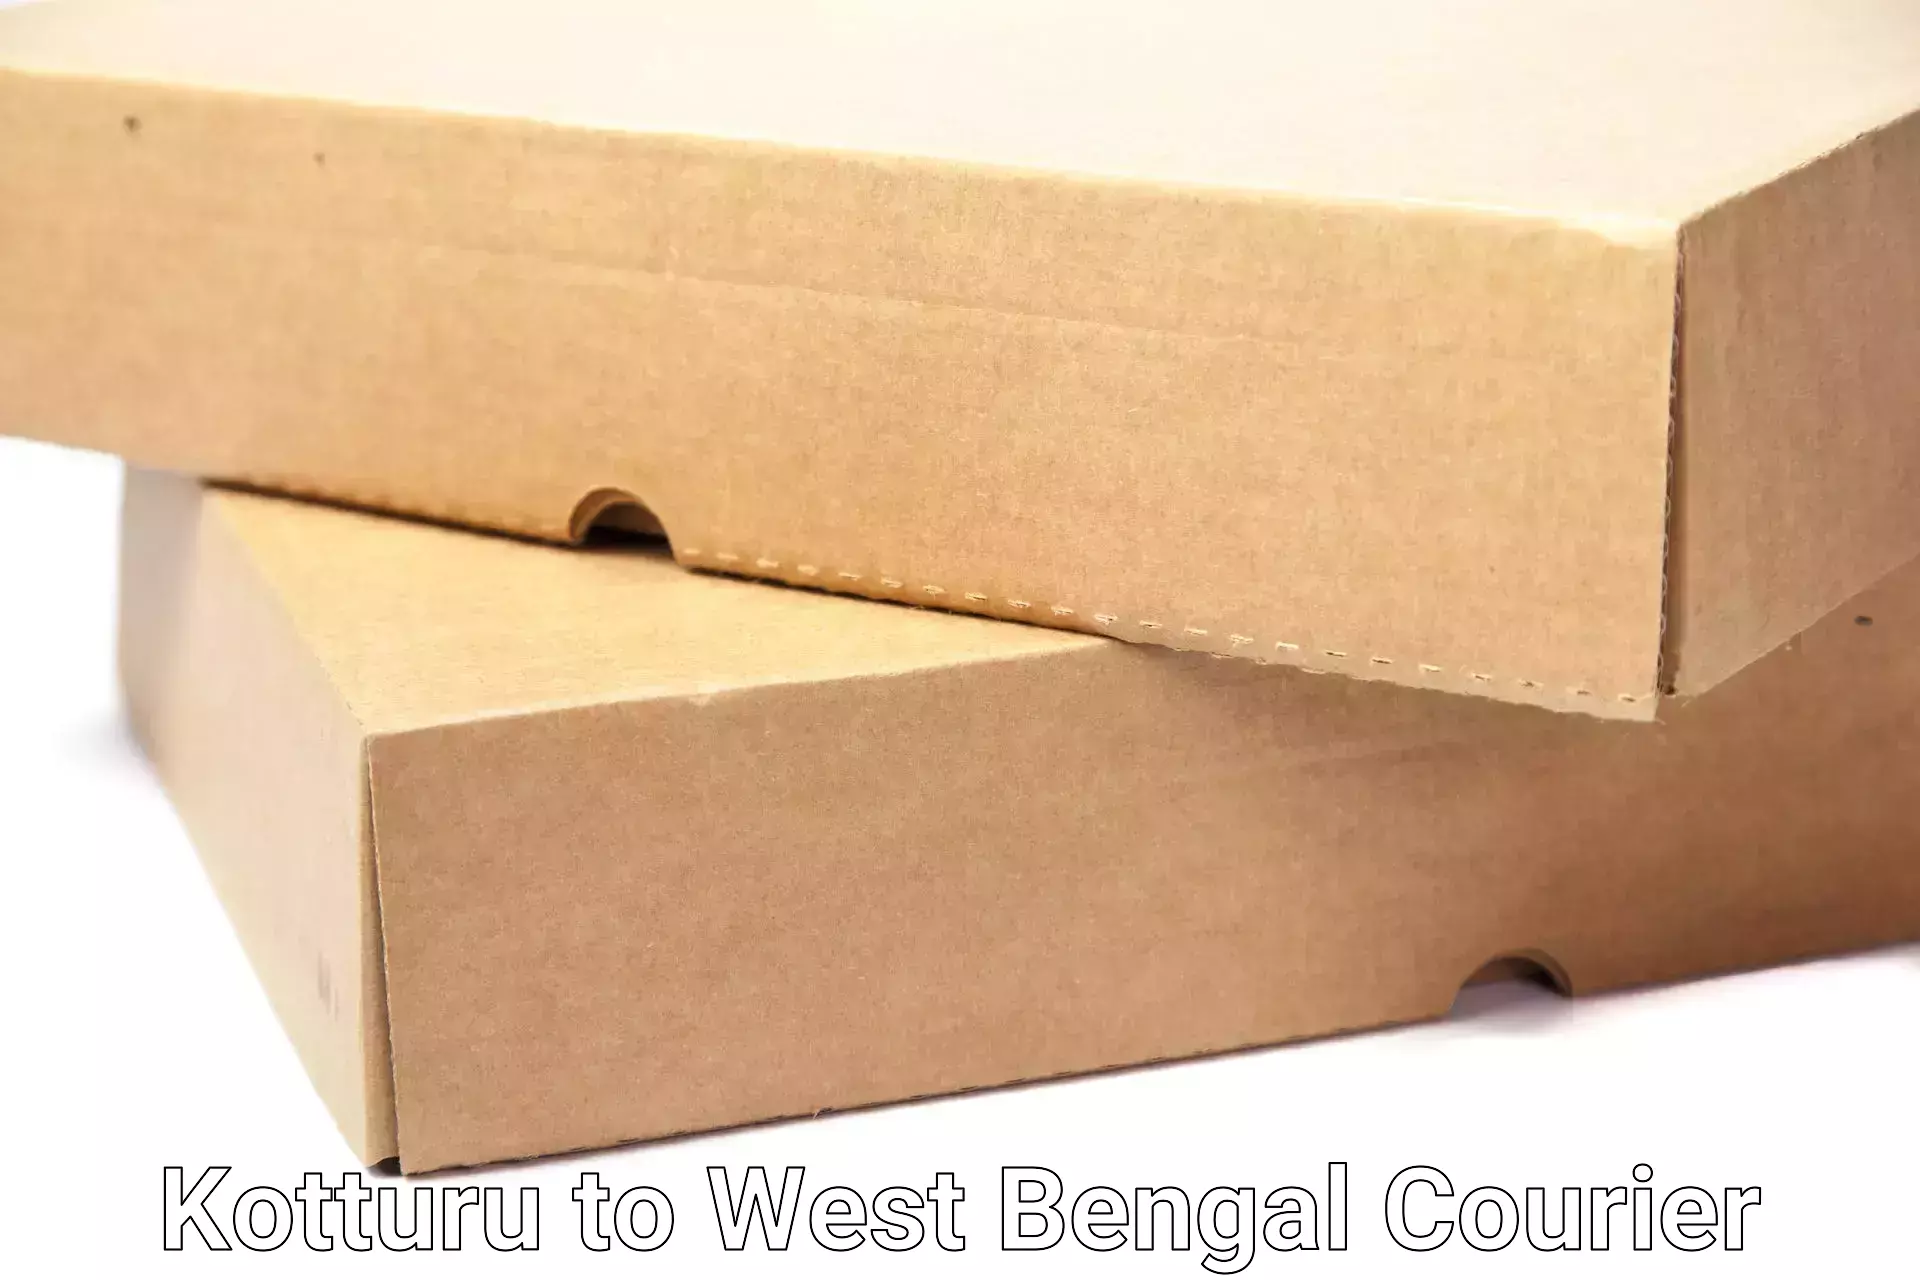 Professional moving company in Kotturu to West Bengal